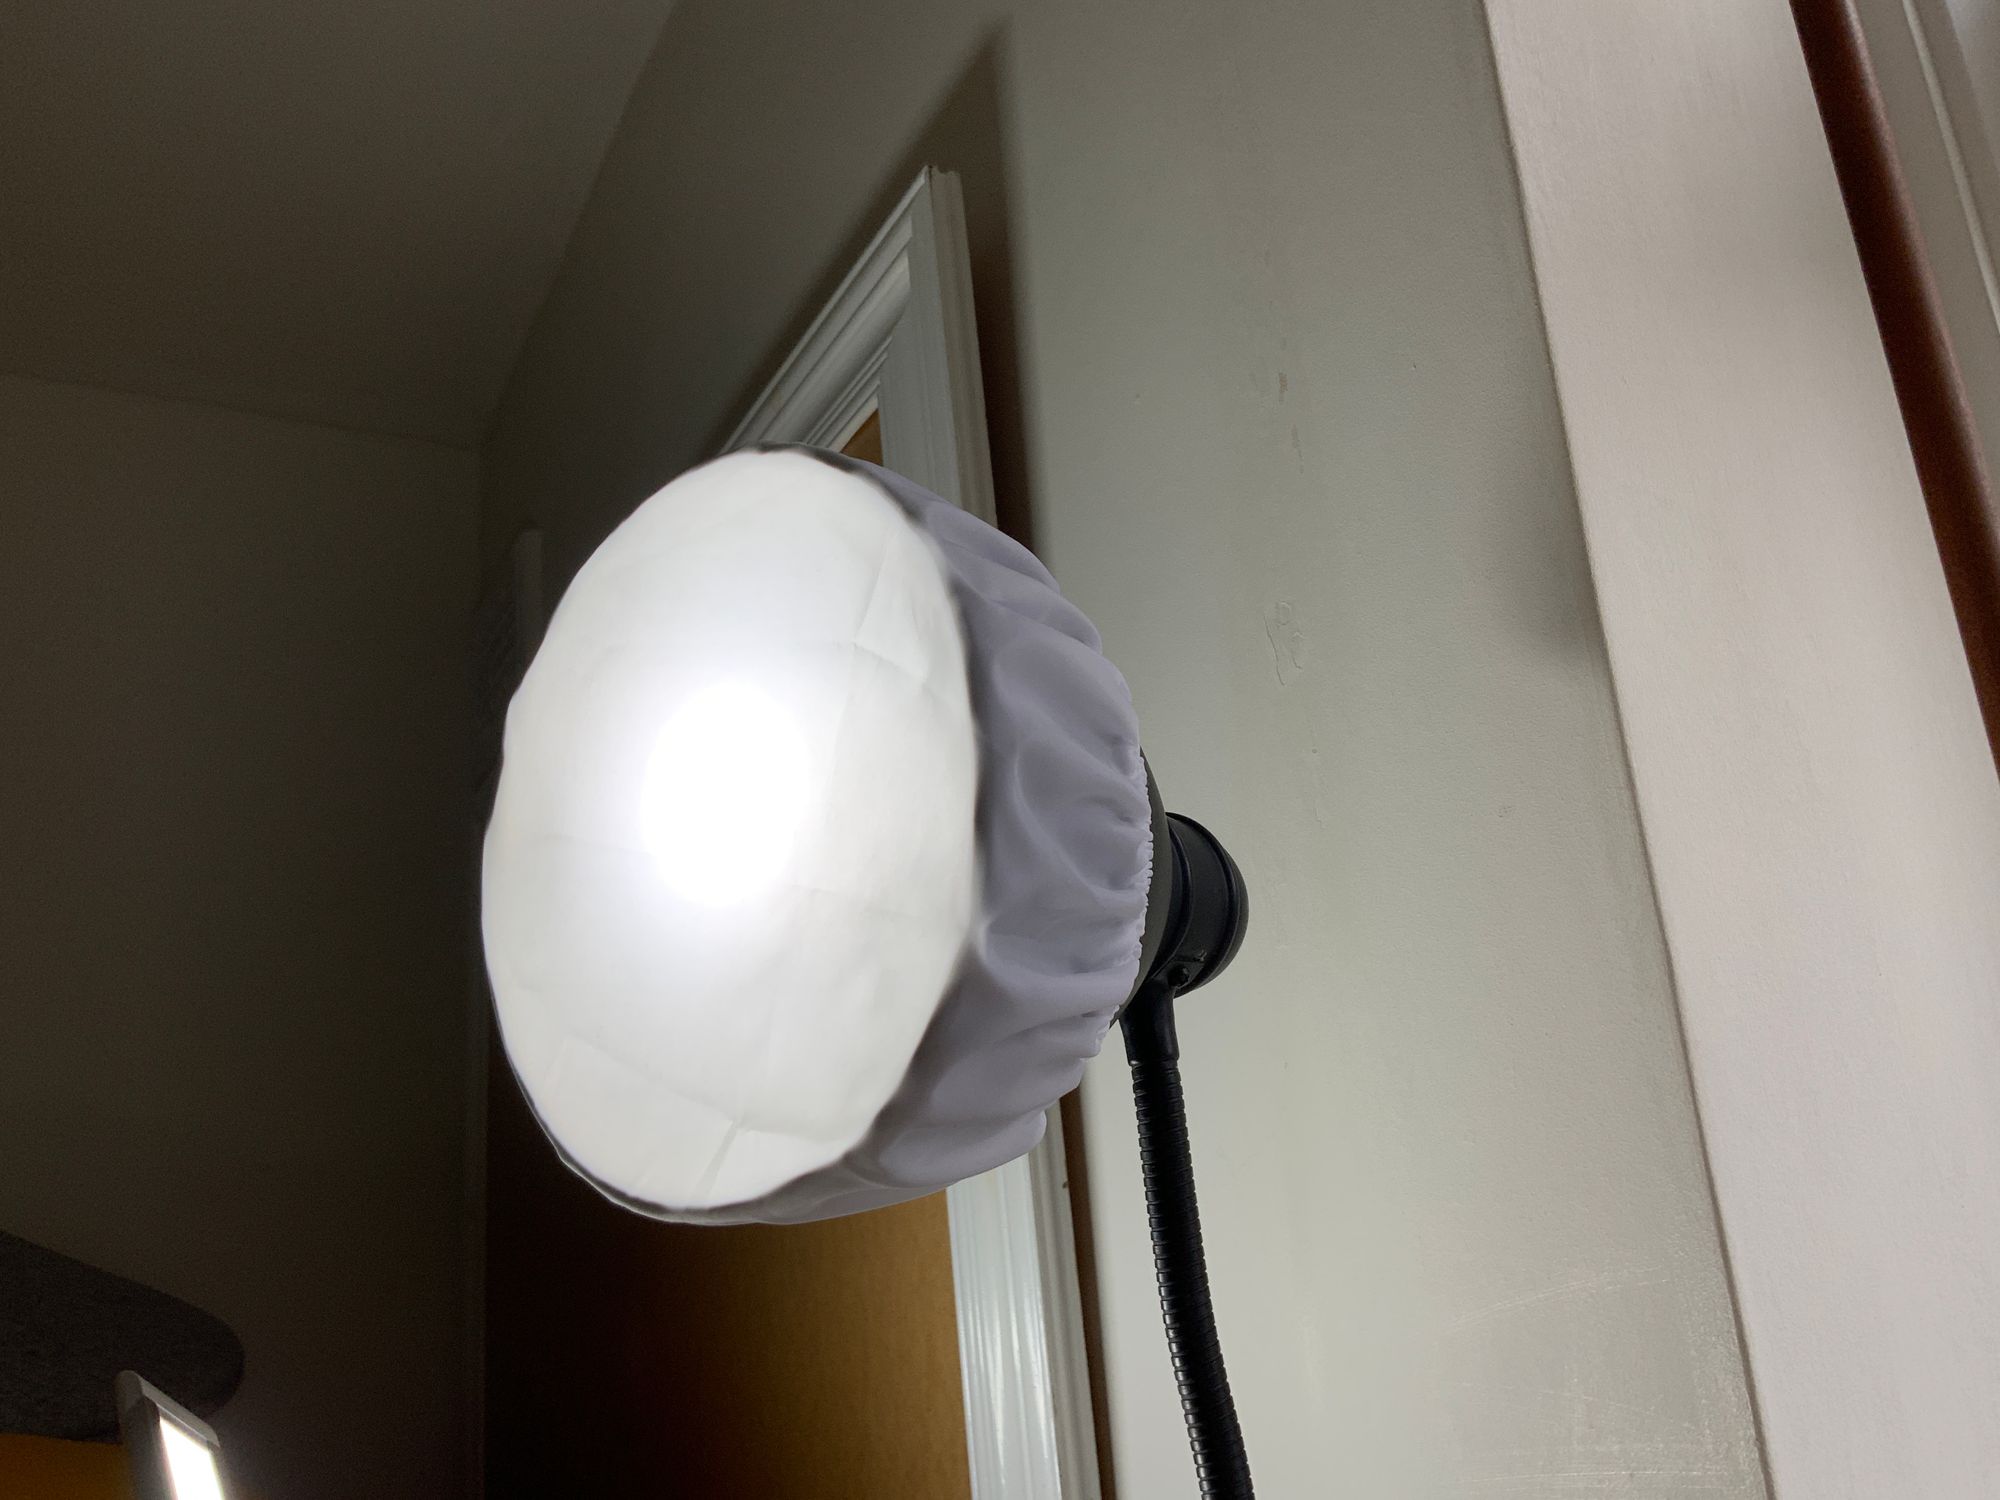 A basic Ikea floor-standing lamp with a professional lighting diffuser added